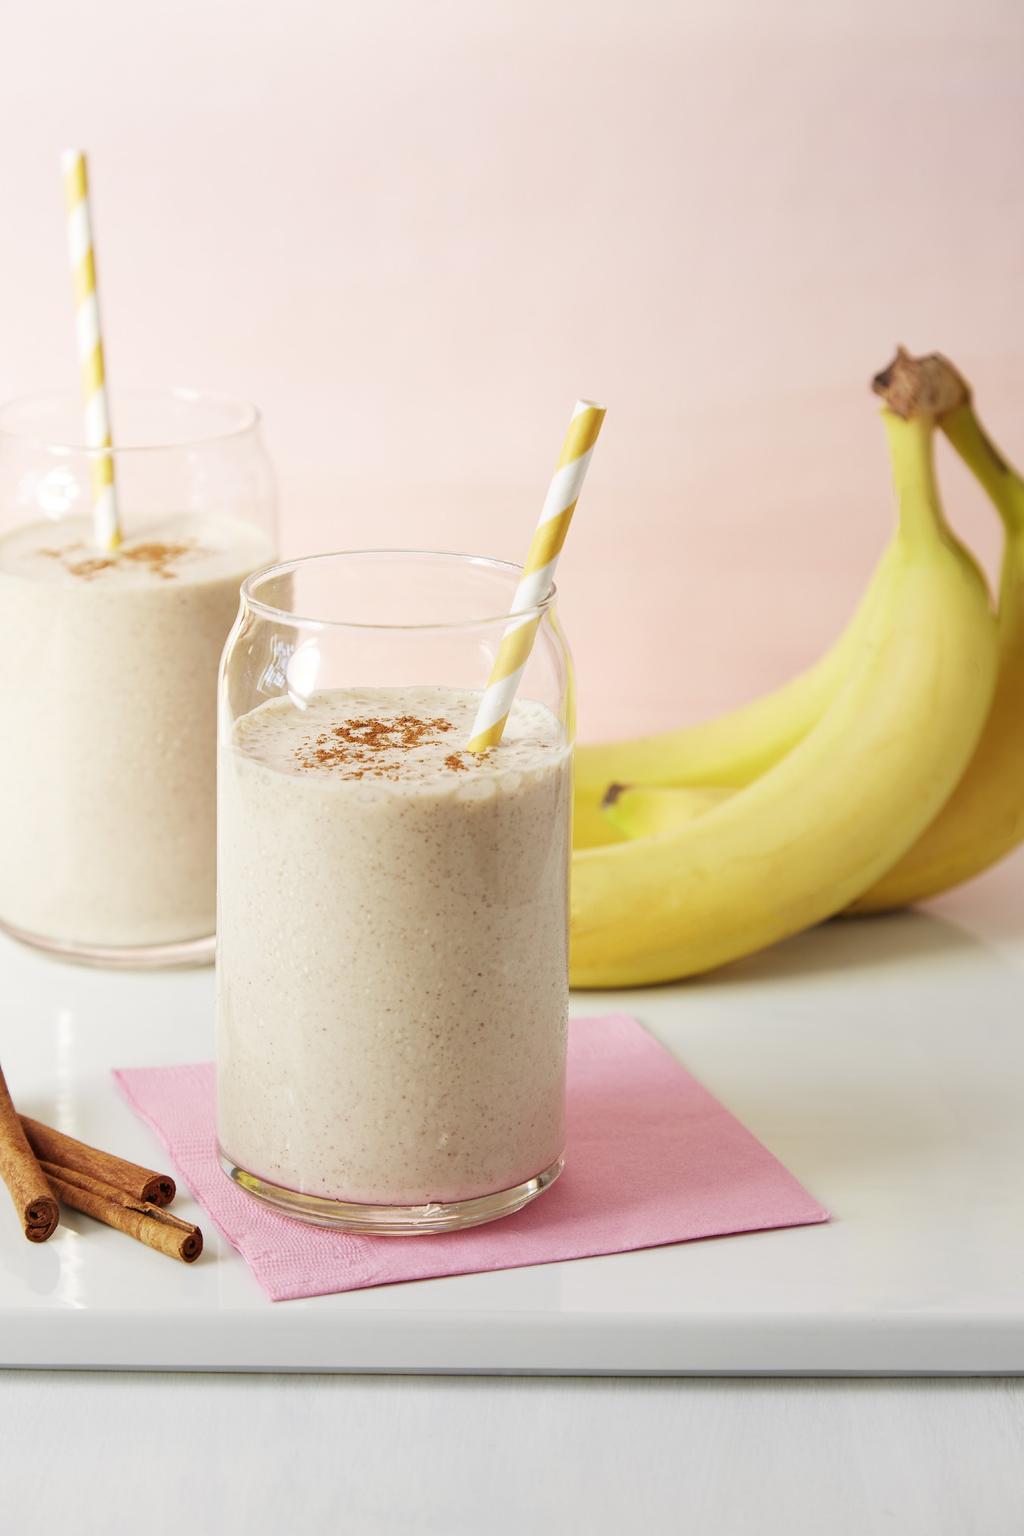 Protein Booster Almond-Banana Smoothie I kept this smoothie healthy with low-fat milk and just a touch of honey.